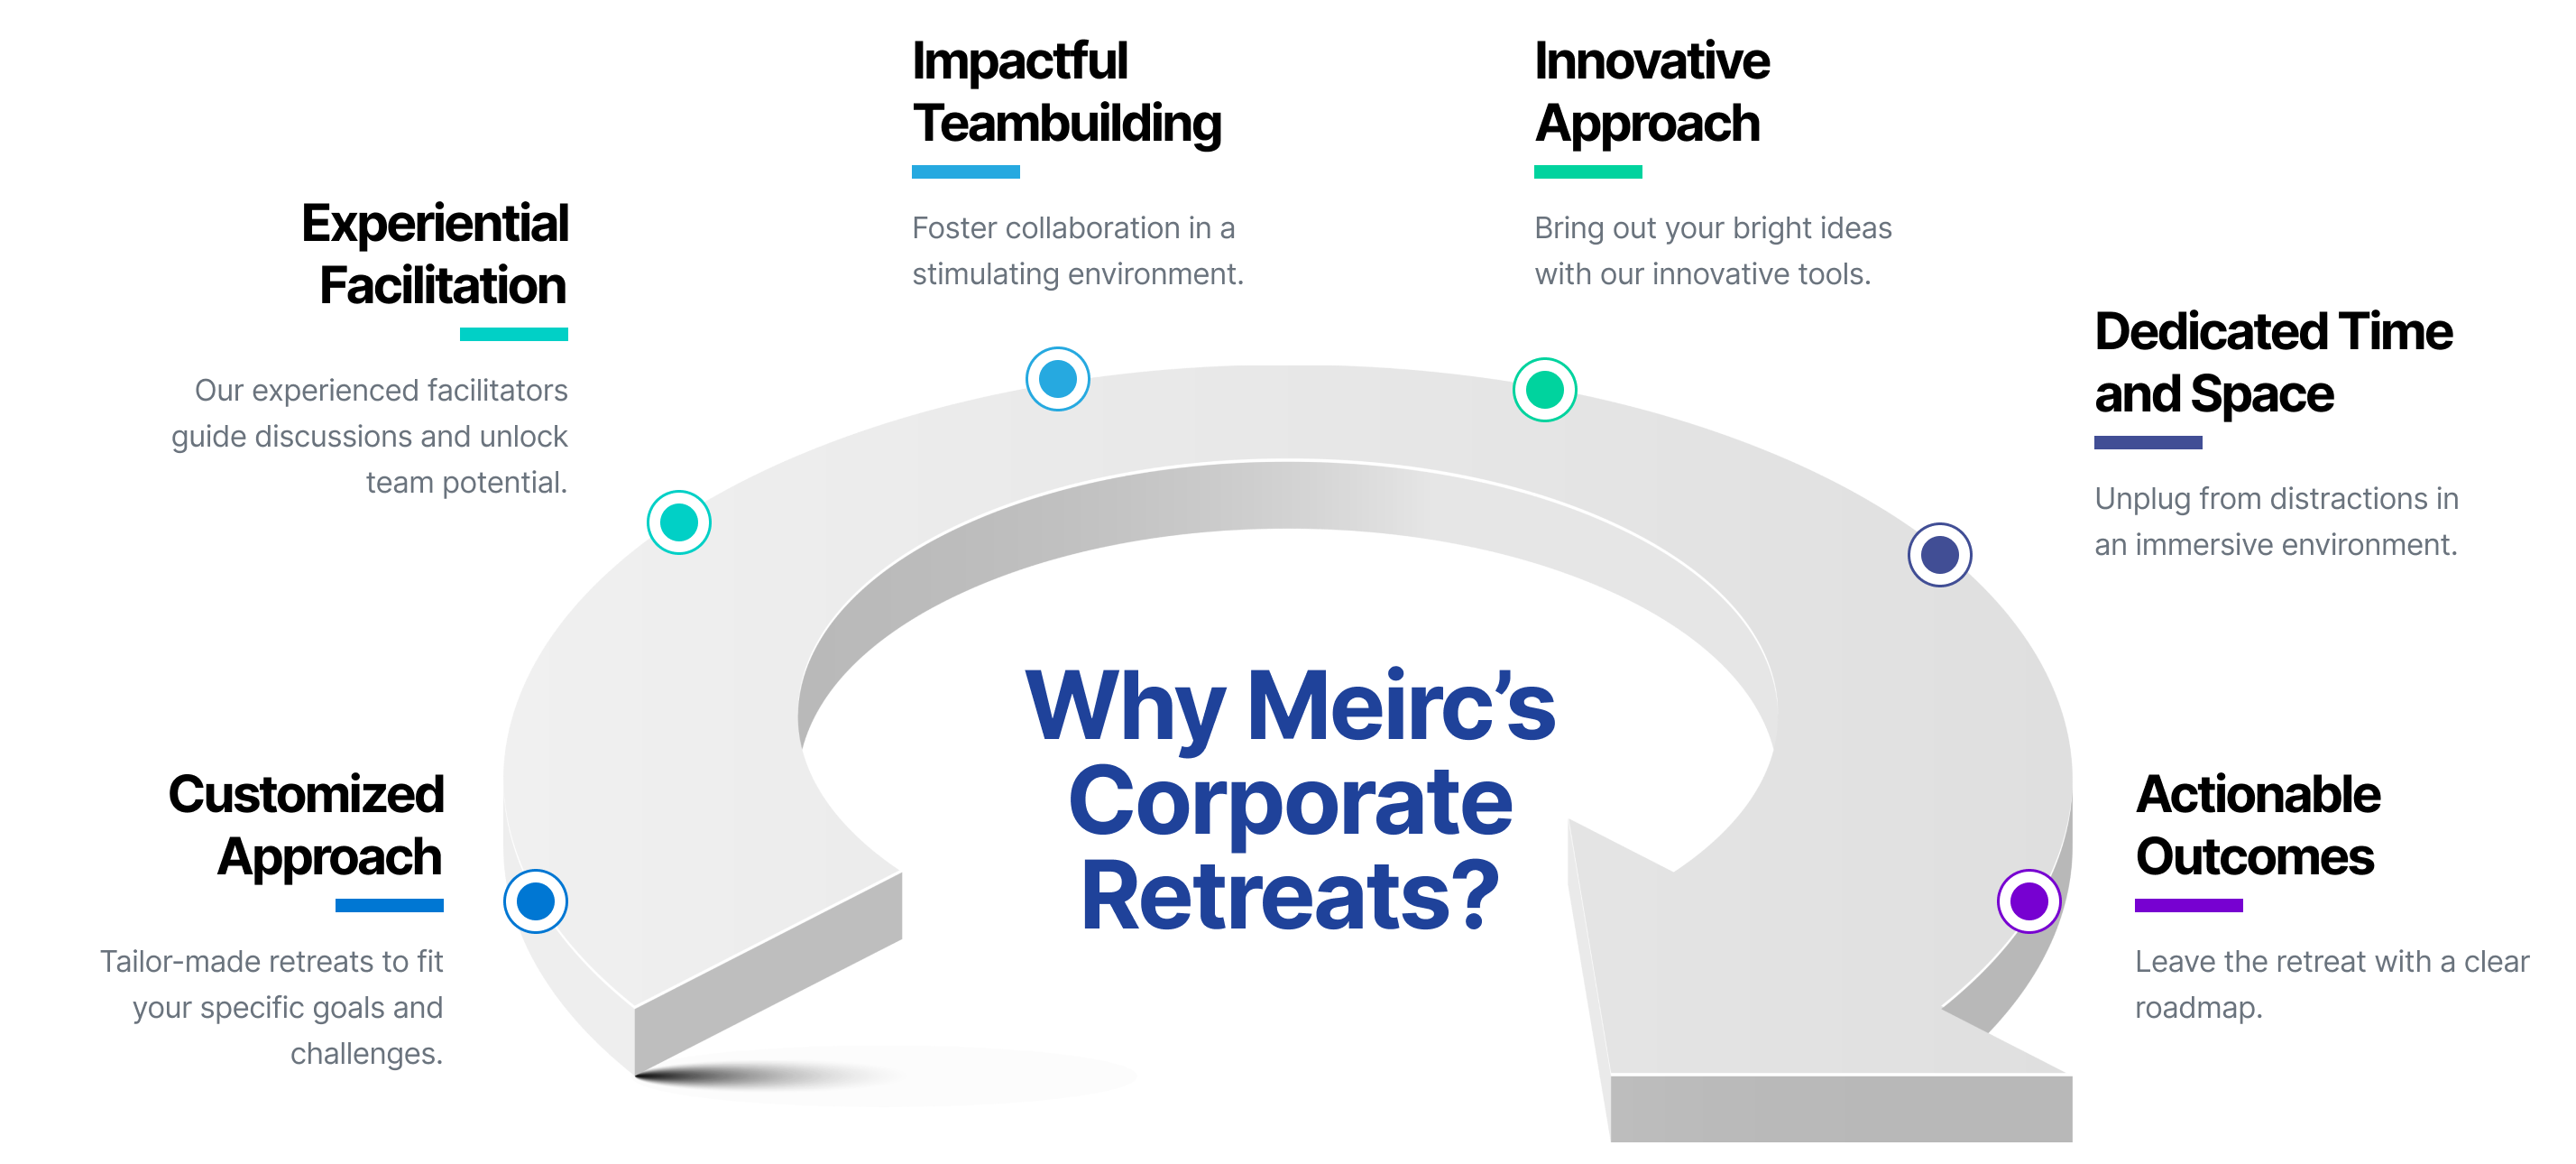 Why Meirc’s Corporate Retreats?